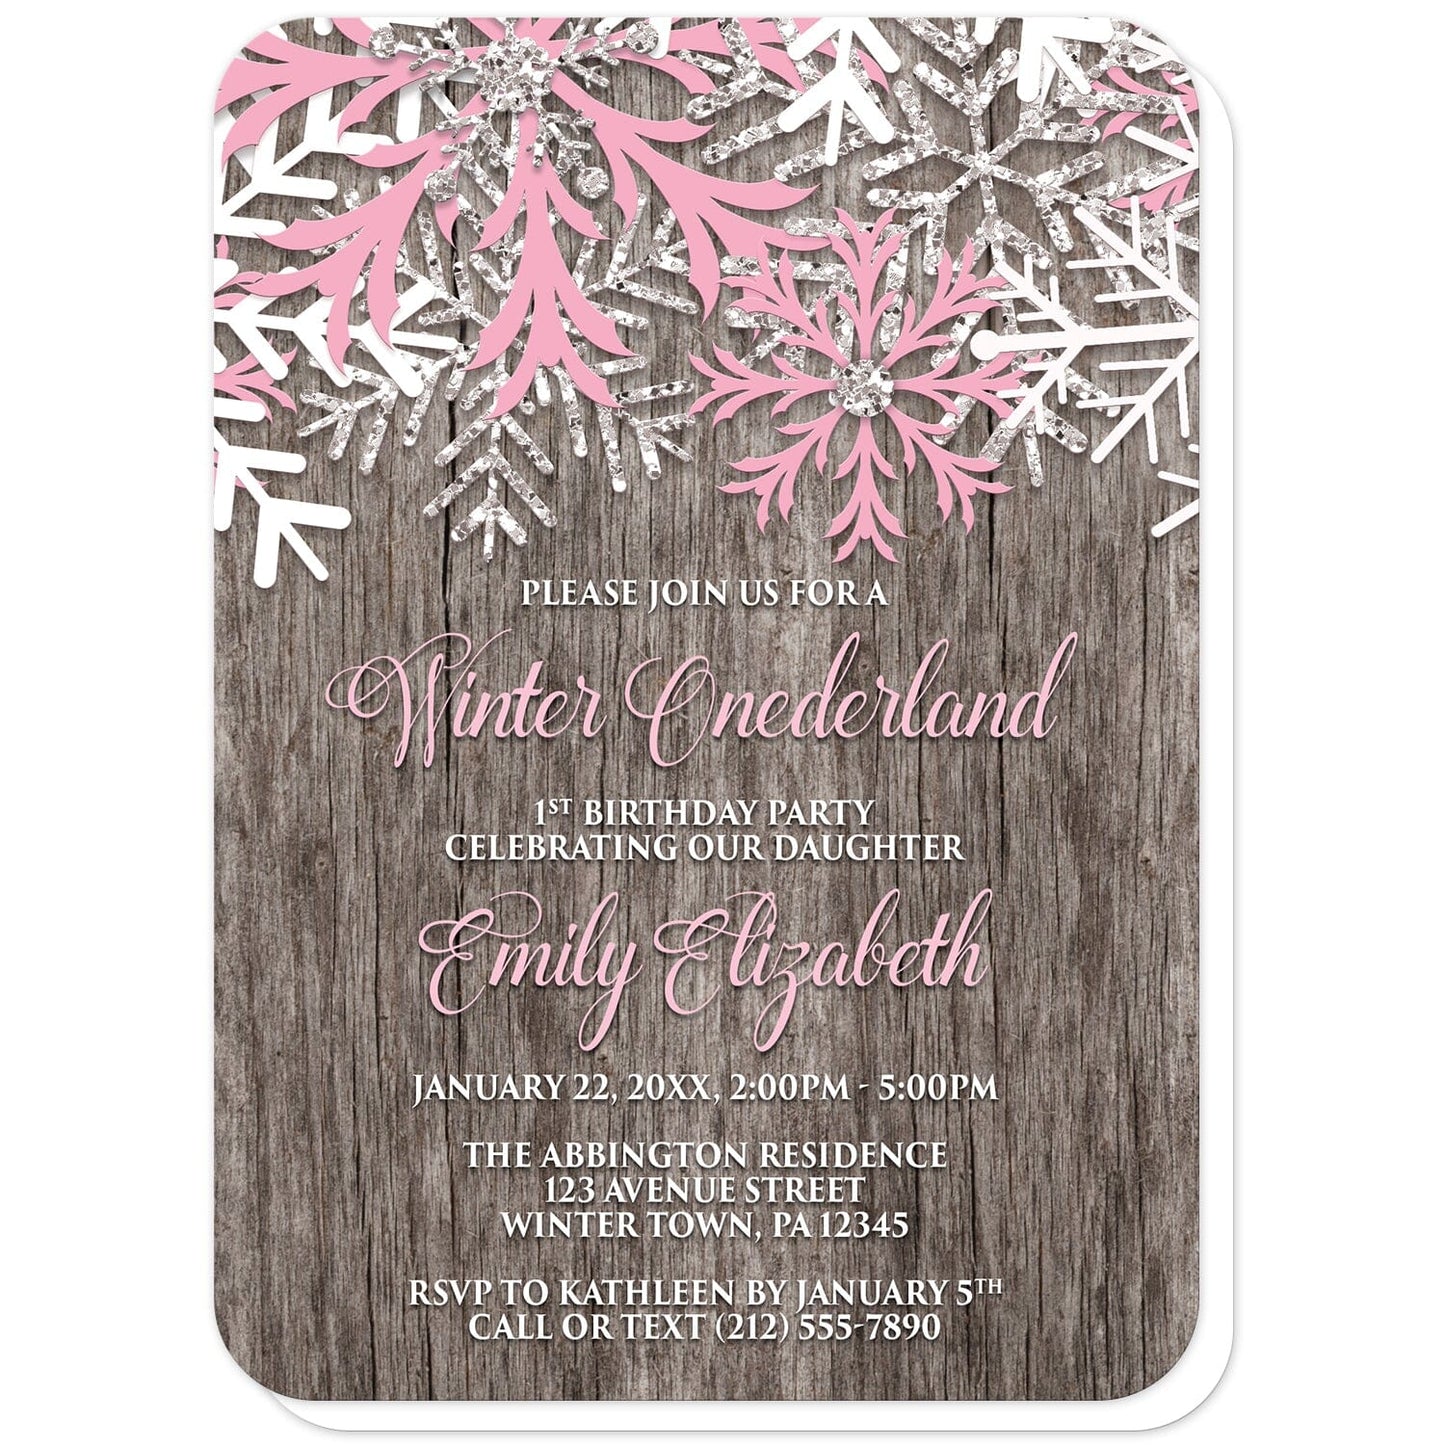 Rustic Wood Pink Snowflake Winter Onederland Invitations (with rounded corners) at Artistically Invited. Country-inspired rustic wood pink snowflake Winter Onederland invitations designed with pink, white, and silver-colored glitter-illustrated snowflakes along the top over a rustic wood illustration. Your personalized 1st birthday party details are custom printed in light pink and white over the rustic wood background below the snowflakes. 